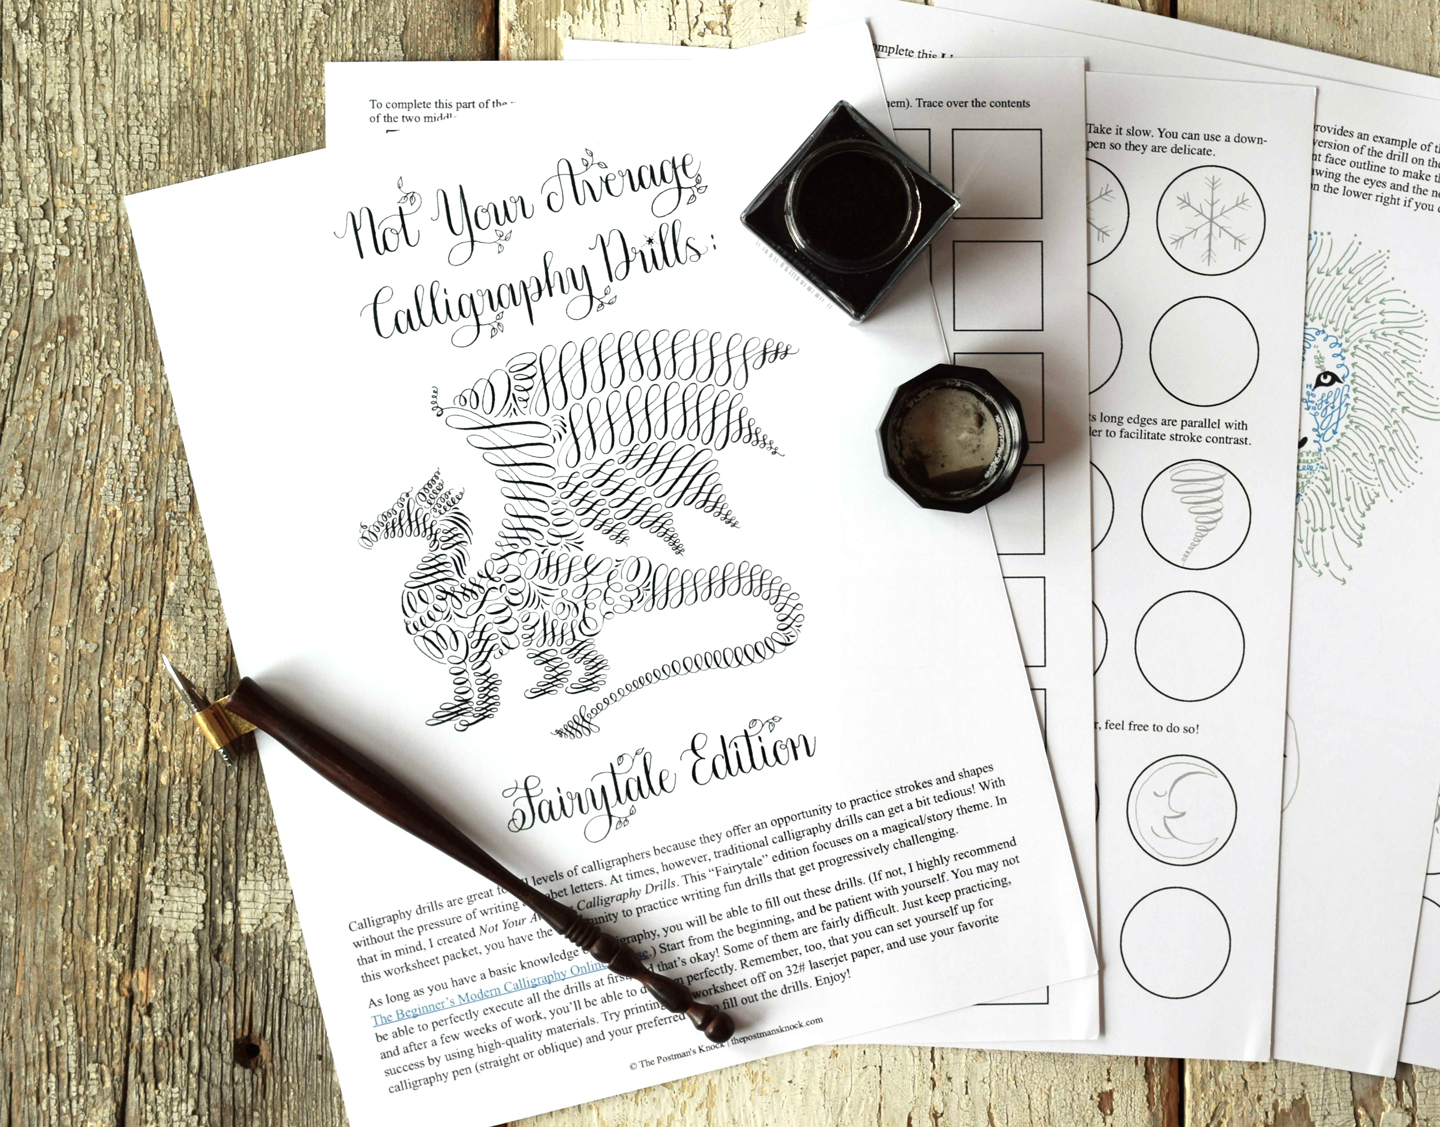 Introducing Fantastic Fairytale Calligraphy Drills